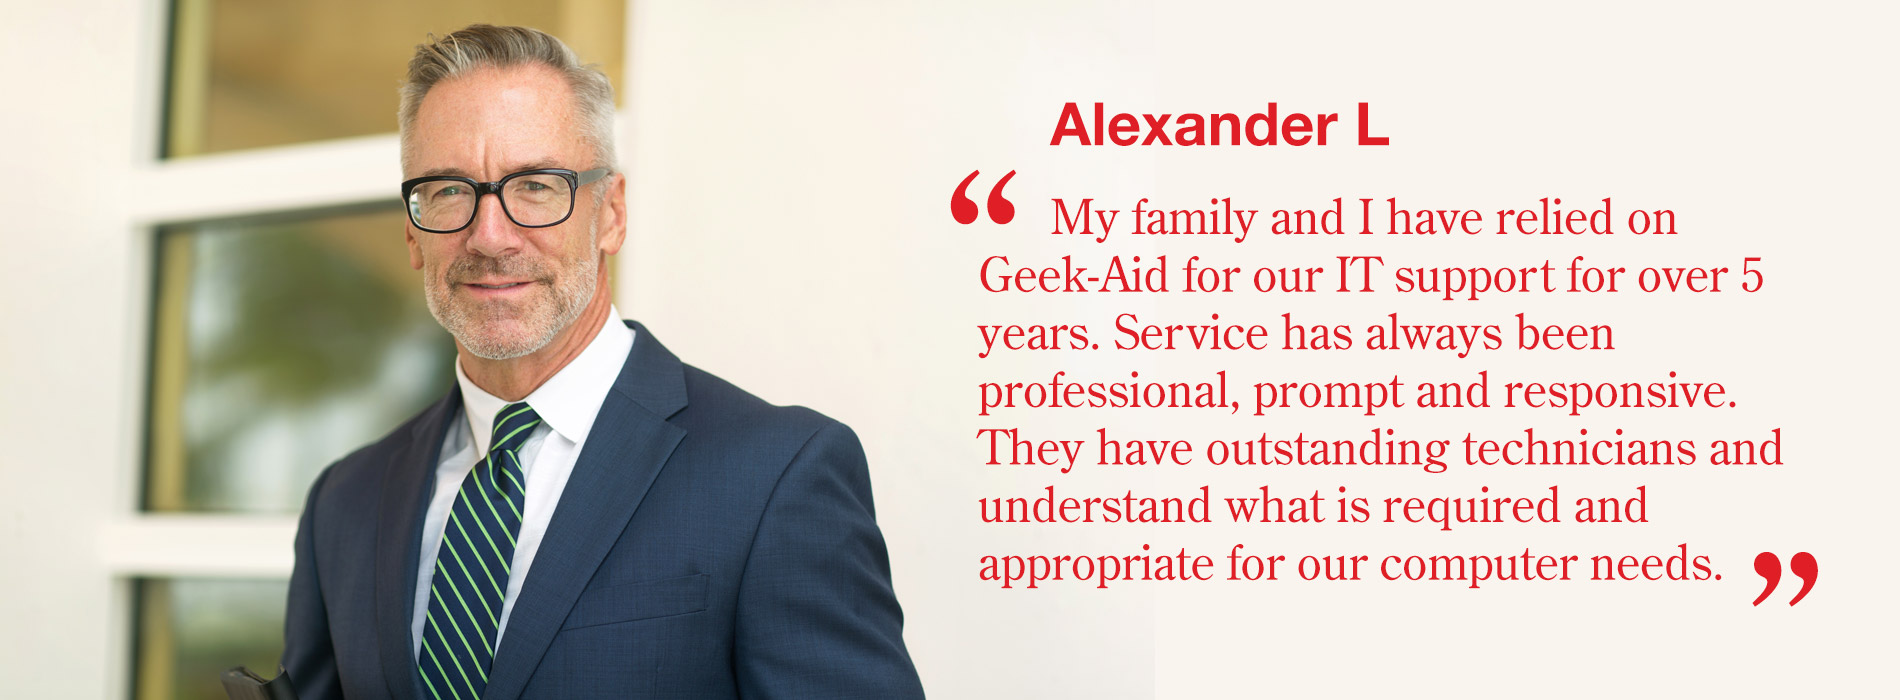 Alexander L - My family and I have relied on Geek-Aid for our IT support for over 5 years. Service has always been professional, prompt and responsive. They have outstanding technicians and understand what is required and appropriate for our computer needs.